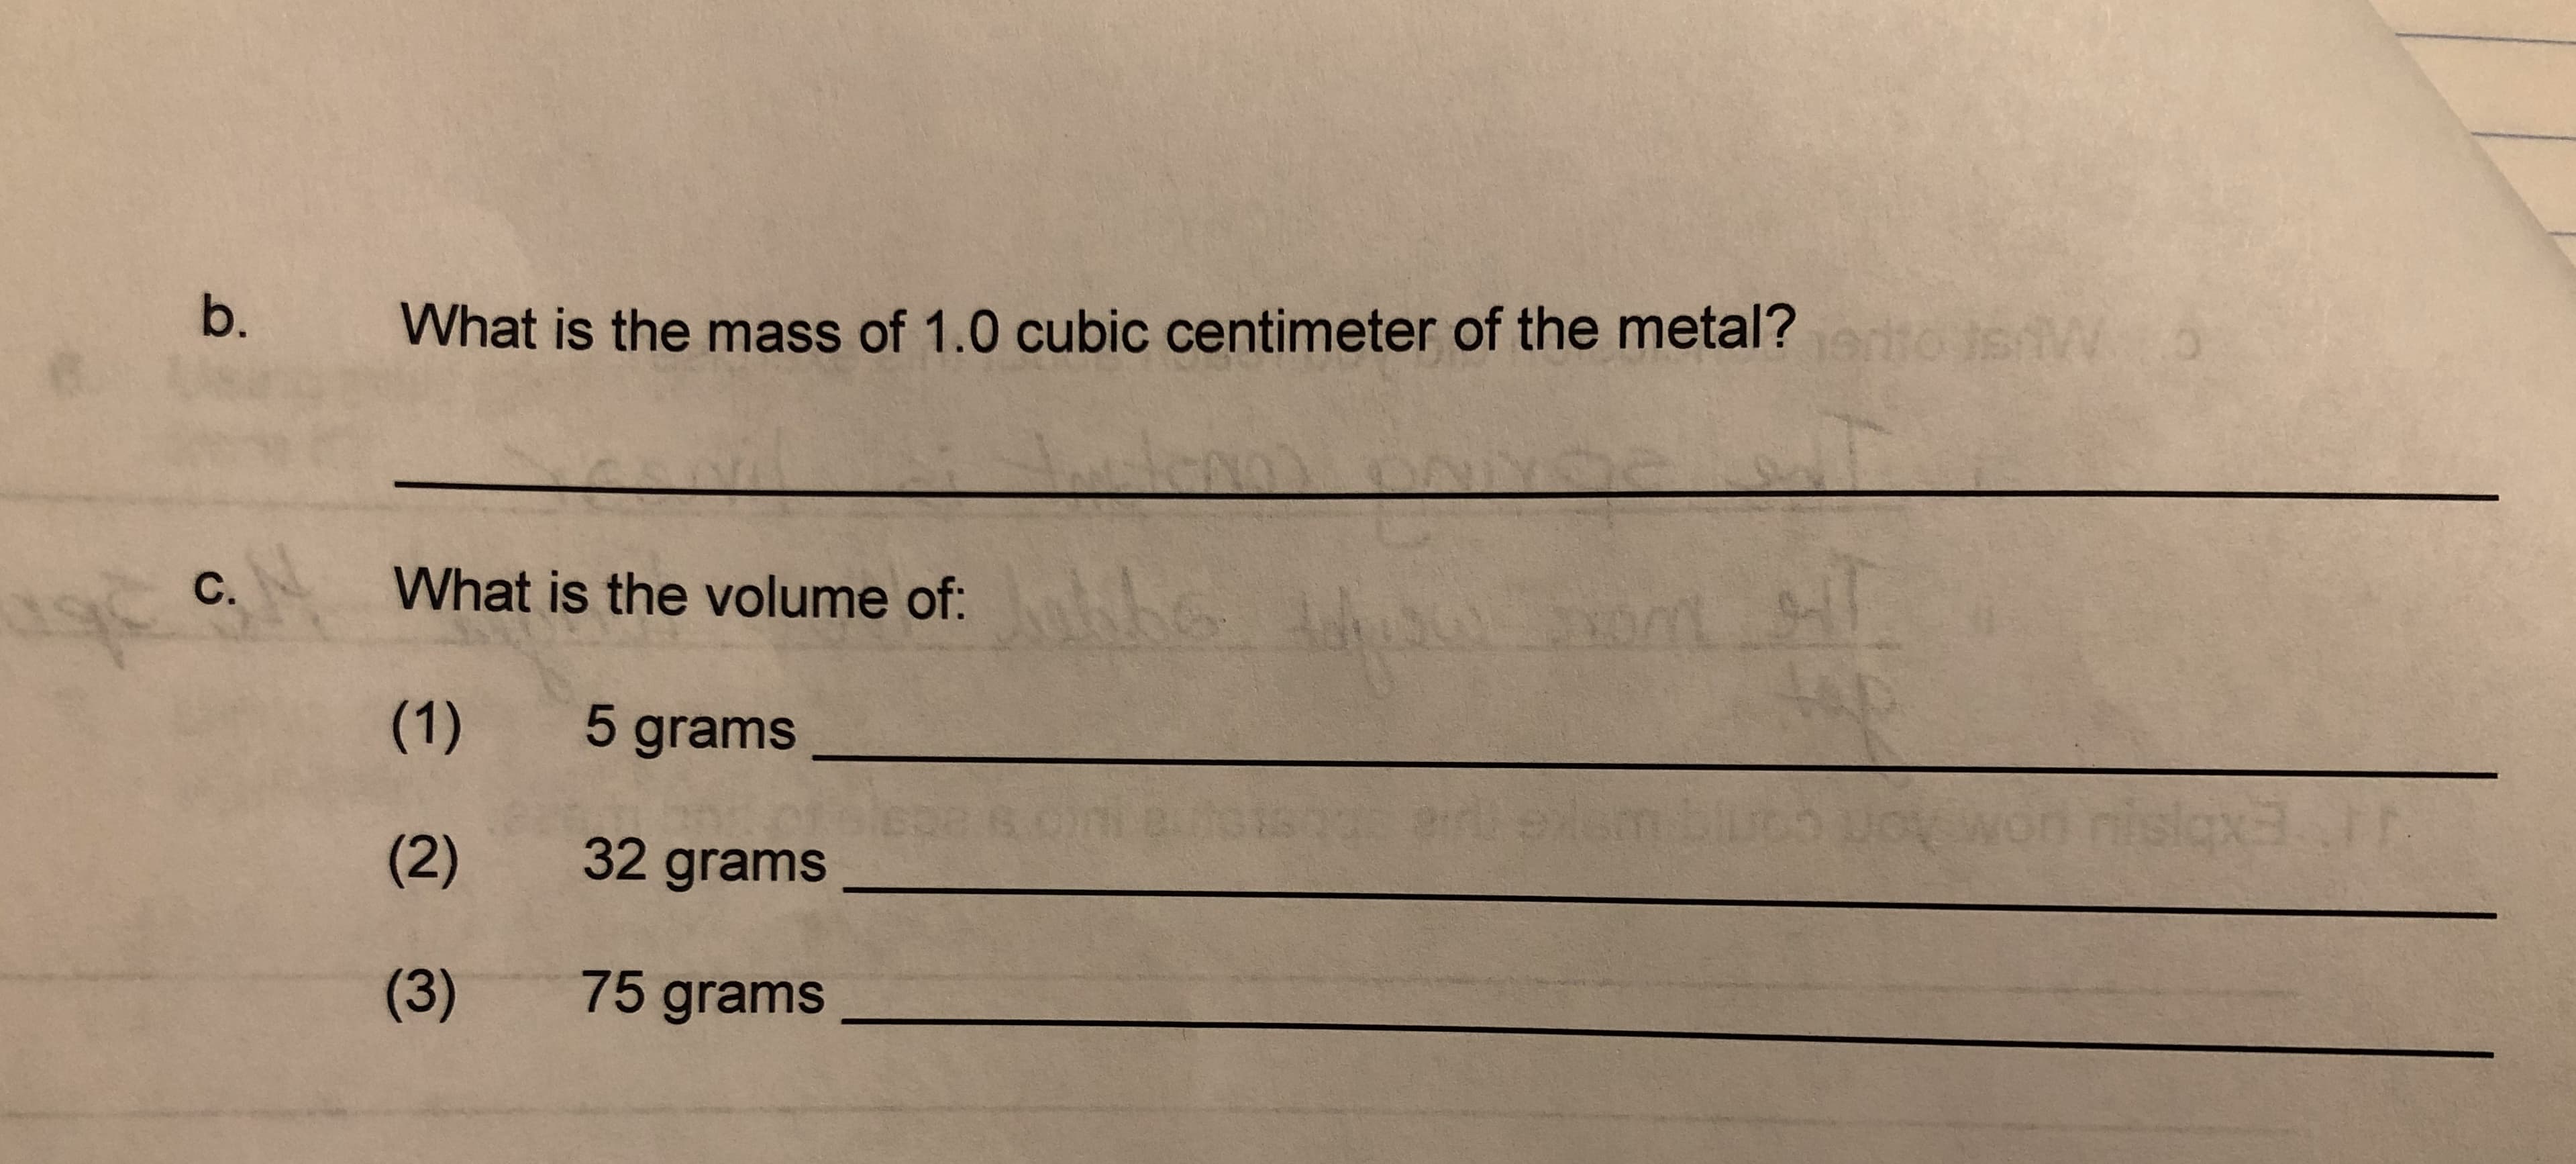 b.
What is the mass of 1.0 cubic centimeter of the metal?
tos
5
What is the volume of:
C.
(1) 5 grams
prexl
nislax3.
(2)
32 grams
(3) 75 grams
